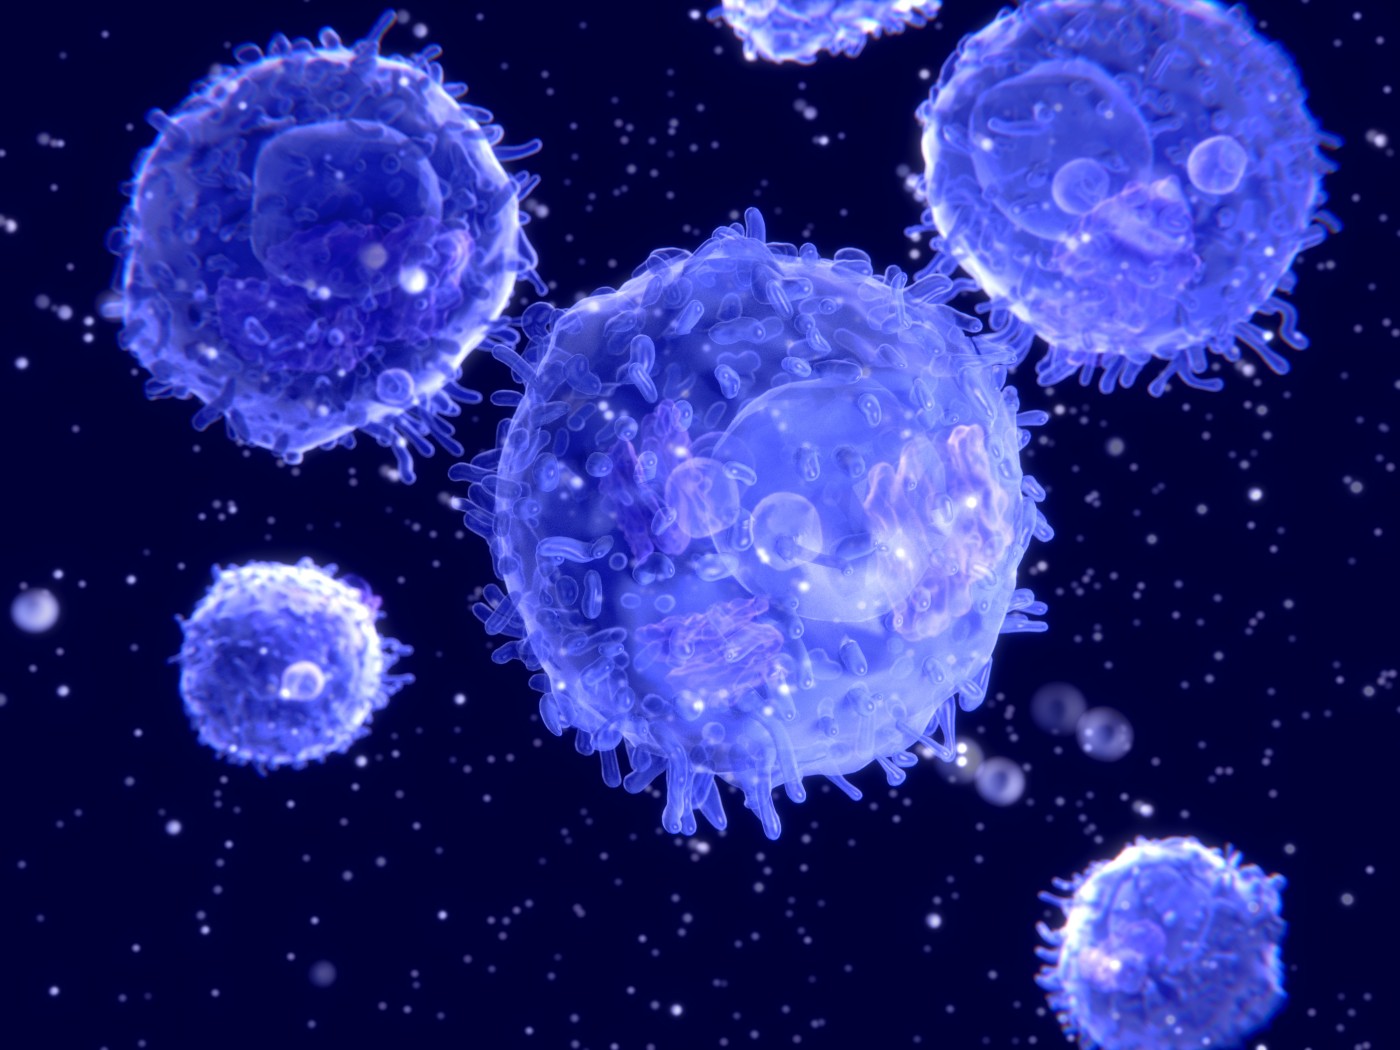 Cancer Immunotherapy Based on Engineered Immune Cells as a Promising Approach Against Myeloma